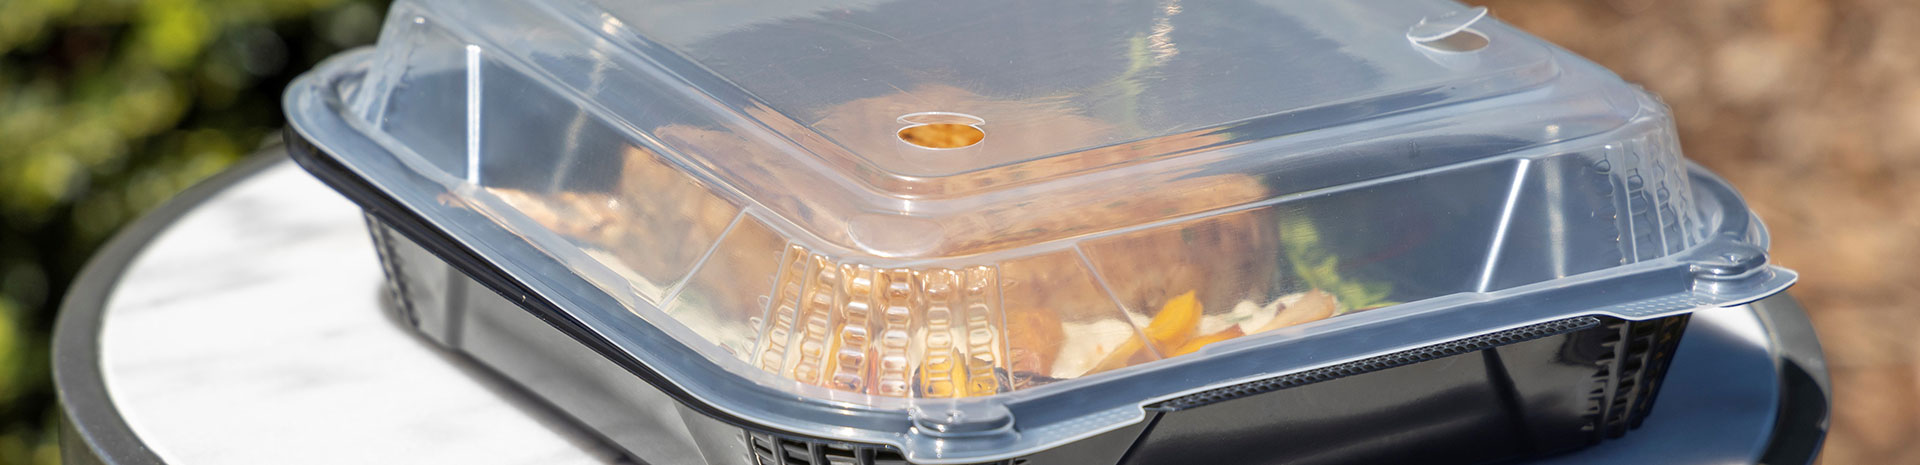 Proview hinged container with clear, vented lid